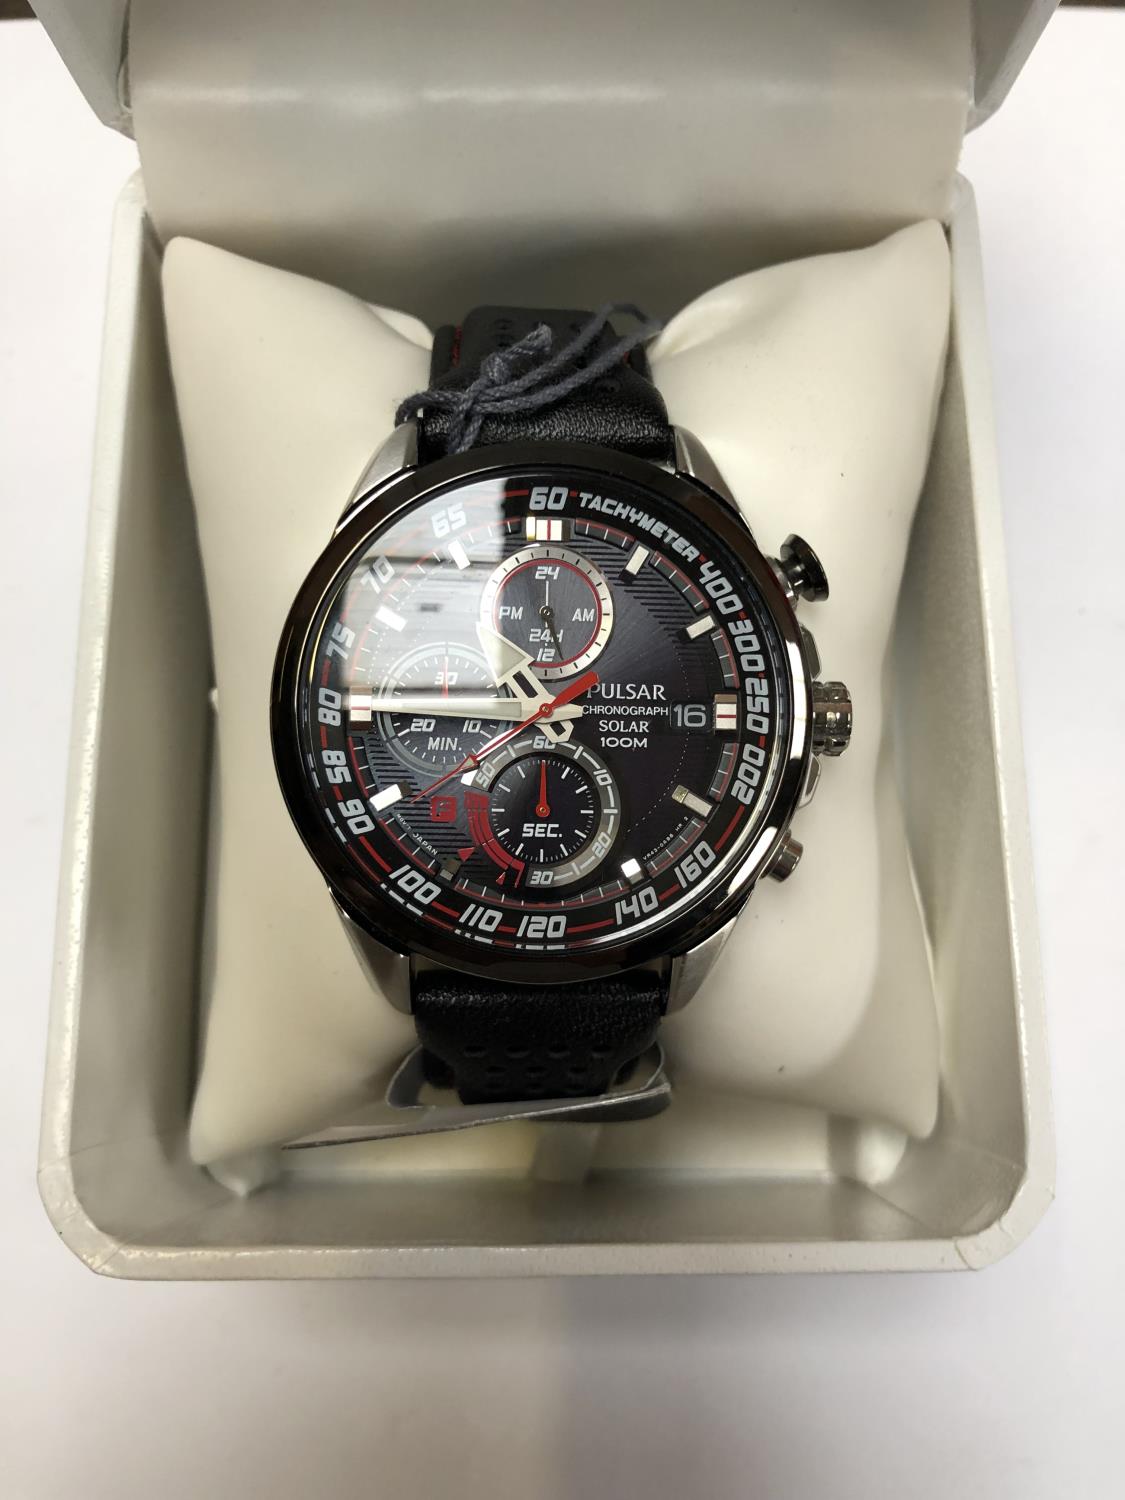 A GENTS BOXED 'PULSAR' SOLAR CHRONOGRAPH WATCH